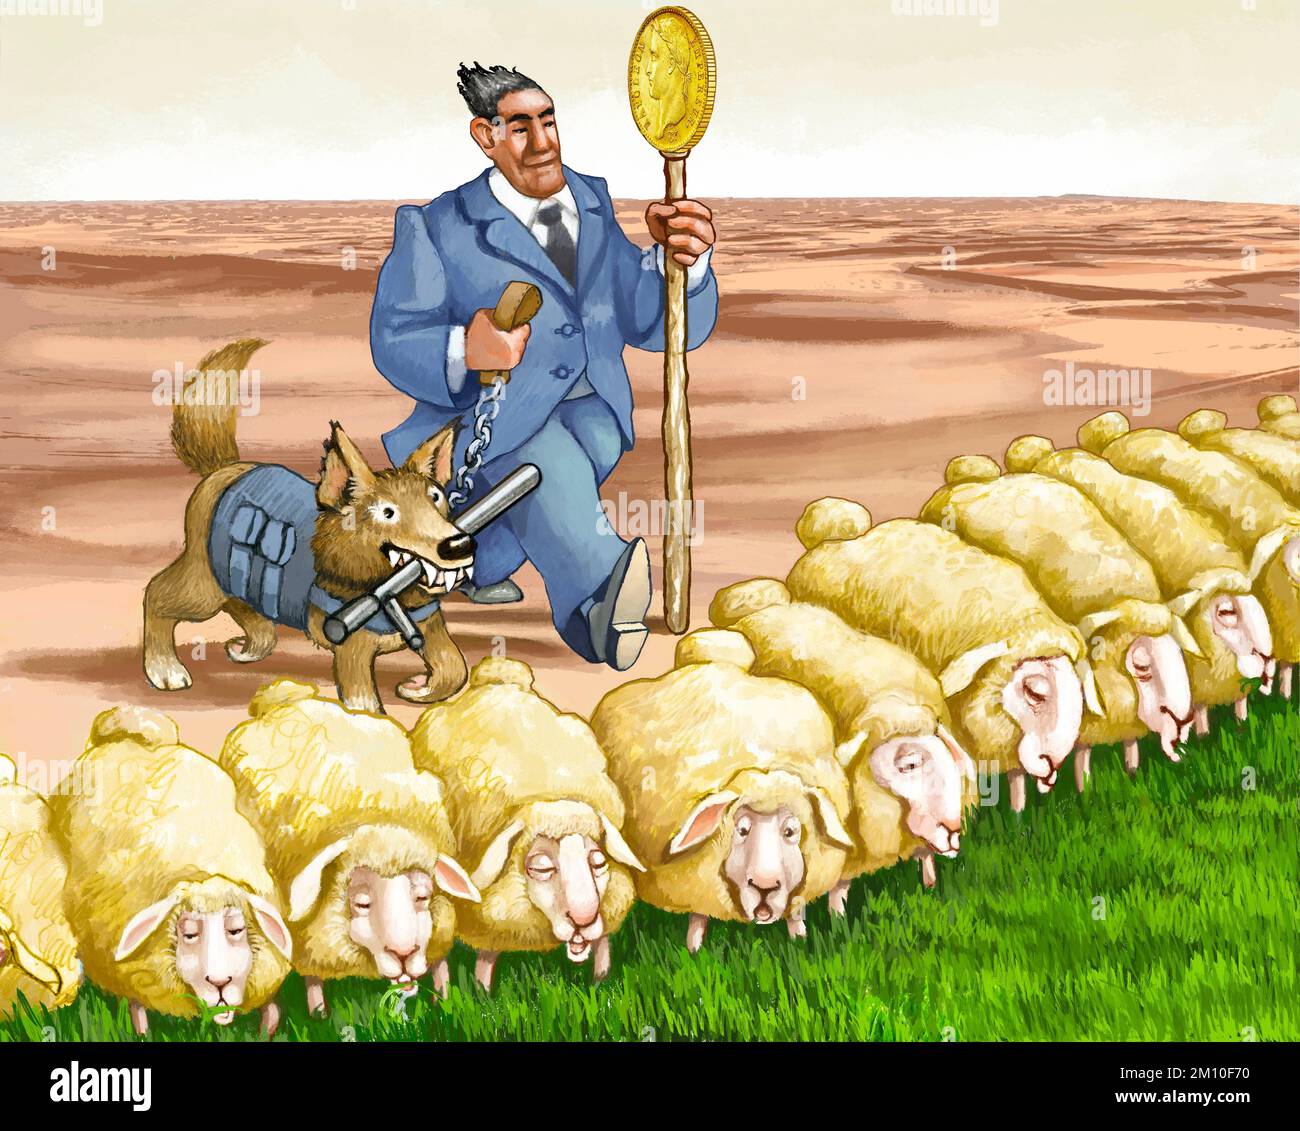 A financier with a coin on his stick and a wolfhound with a truncheon push sheep to eat all the grass leaving the desert behind them, a metaphor for e Stock Photo